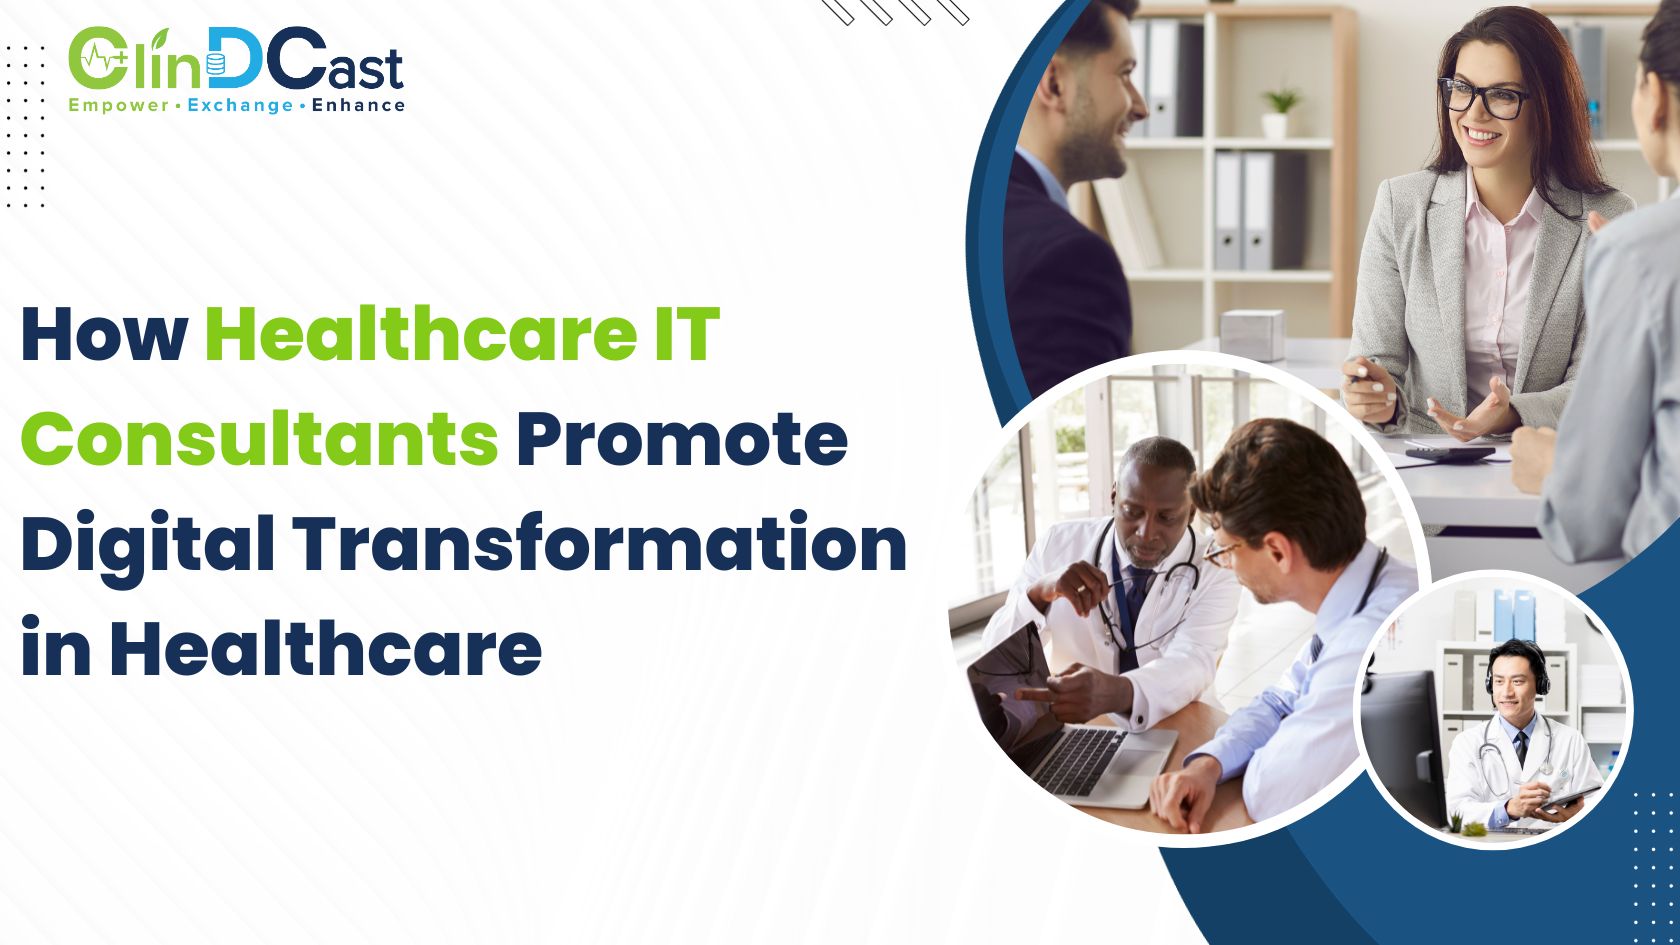 How Healthcare IT Consultants Drive Digital Transformation